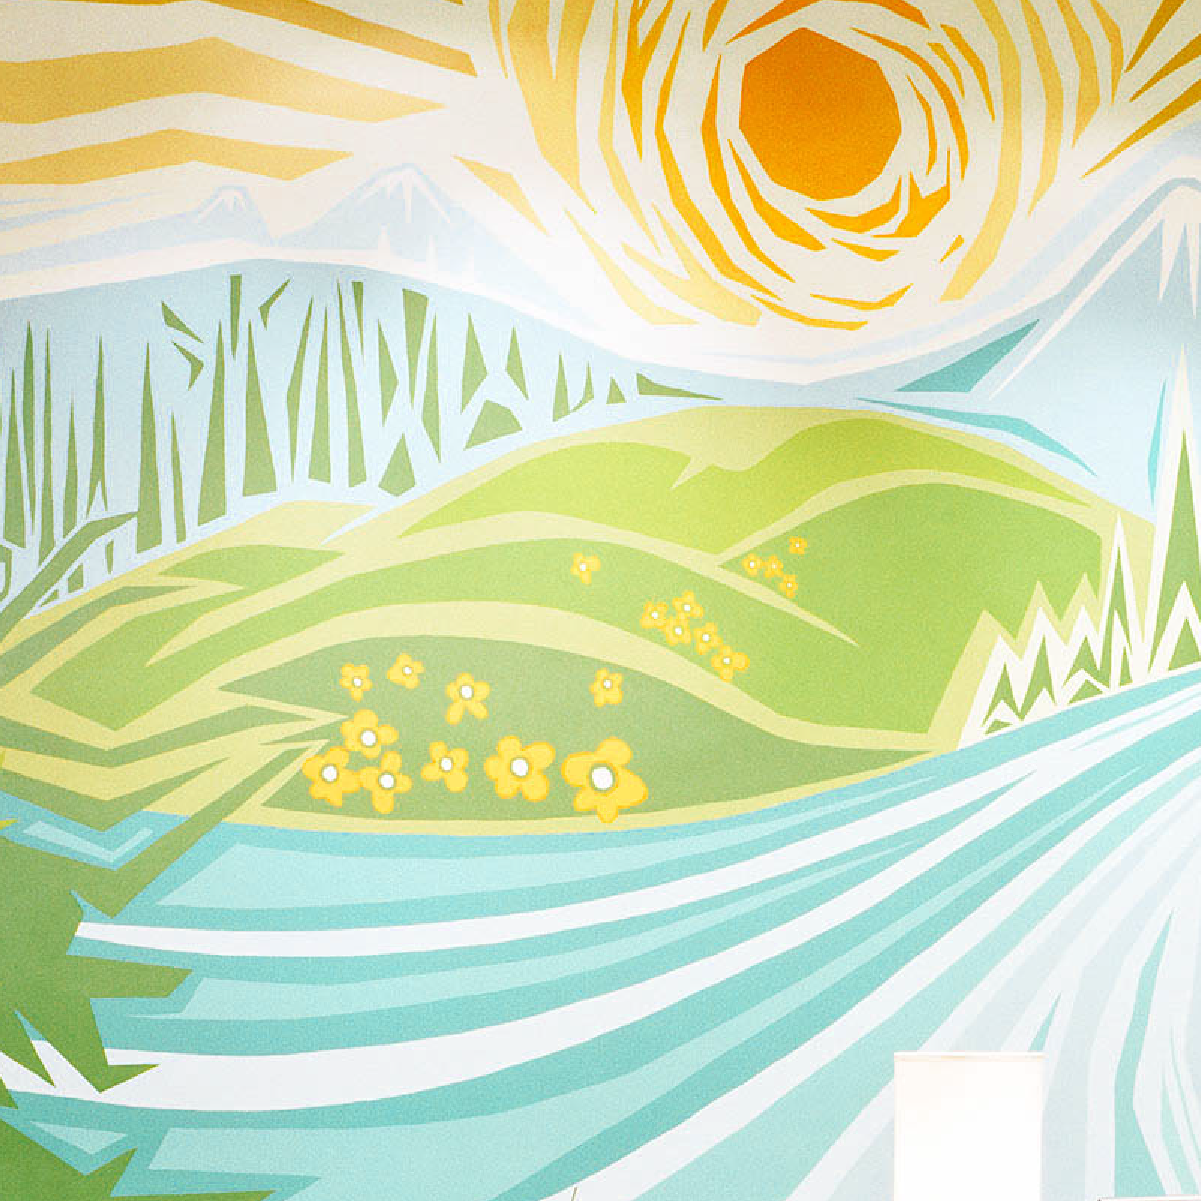 Stylized mural of a sunrise over a green field with yellow flowers and a blue river